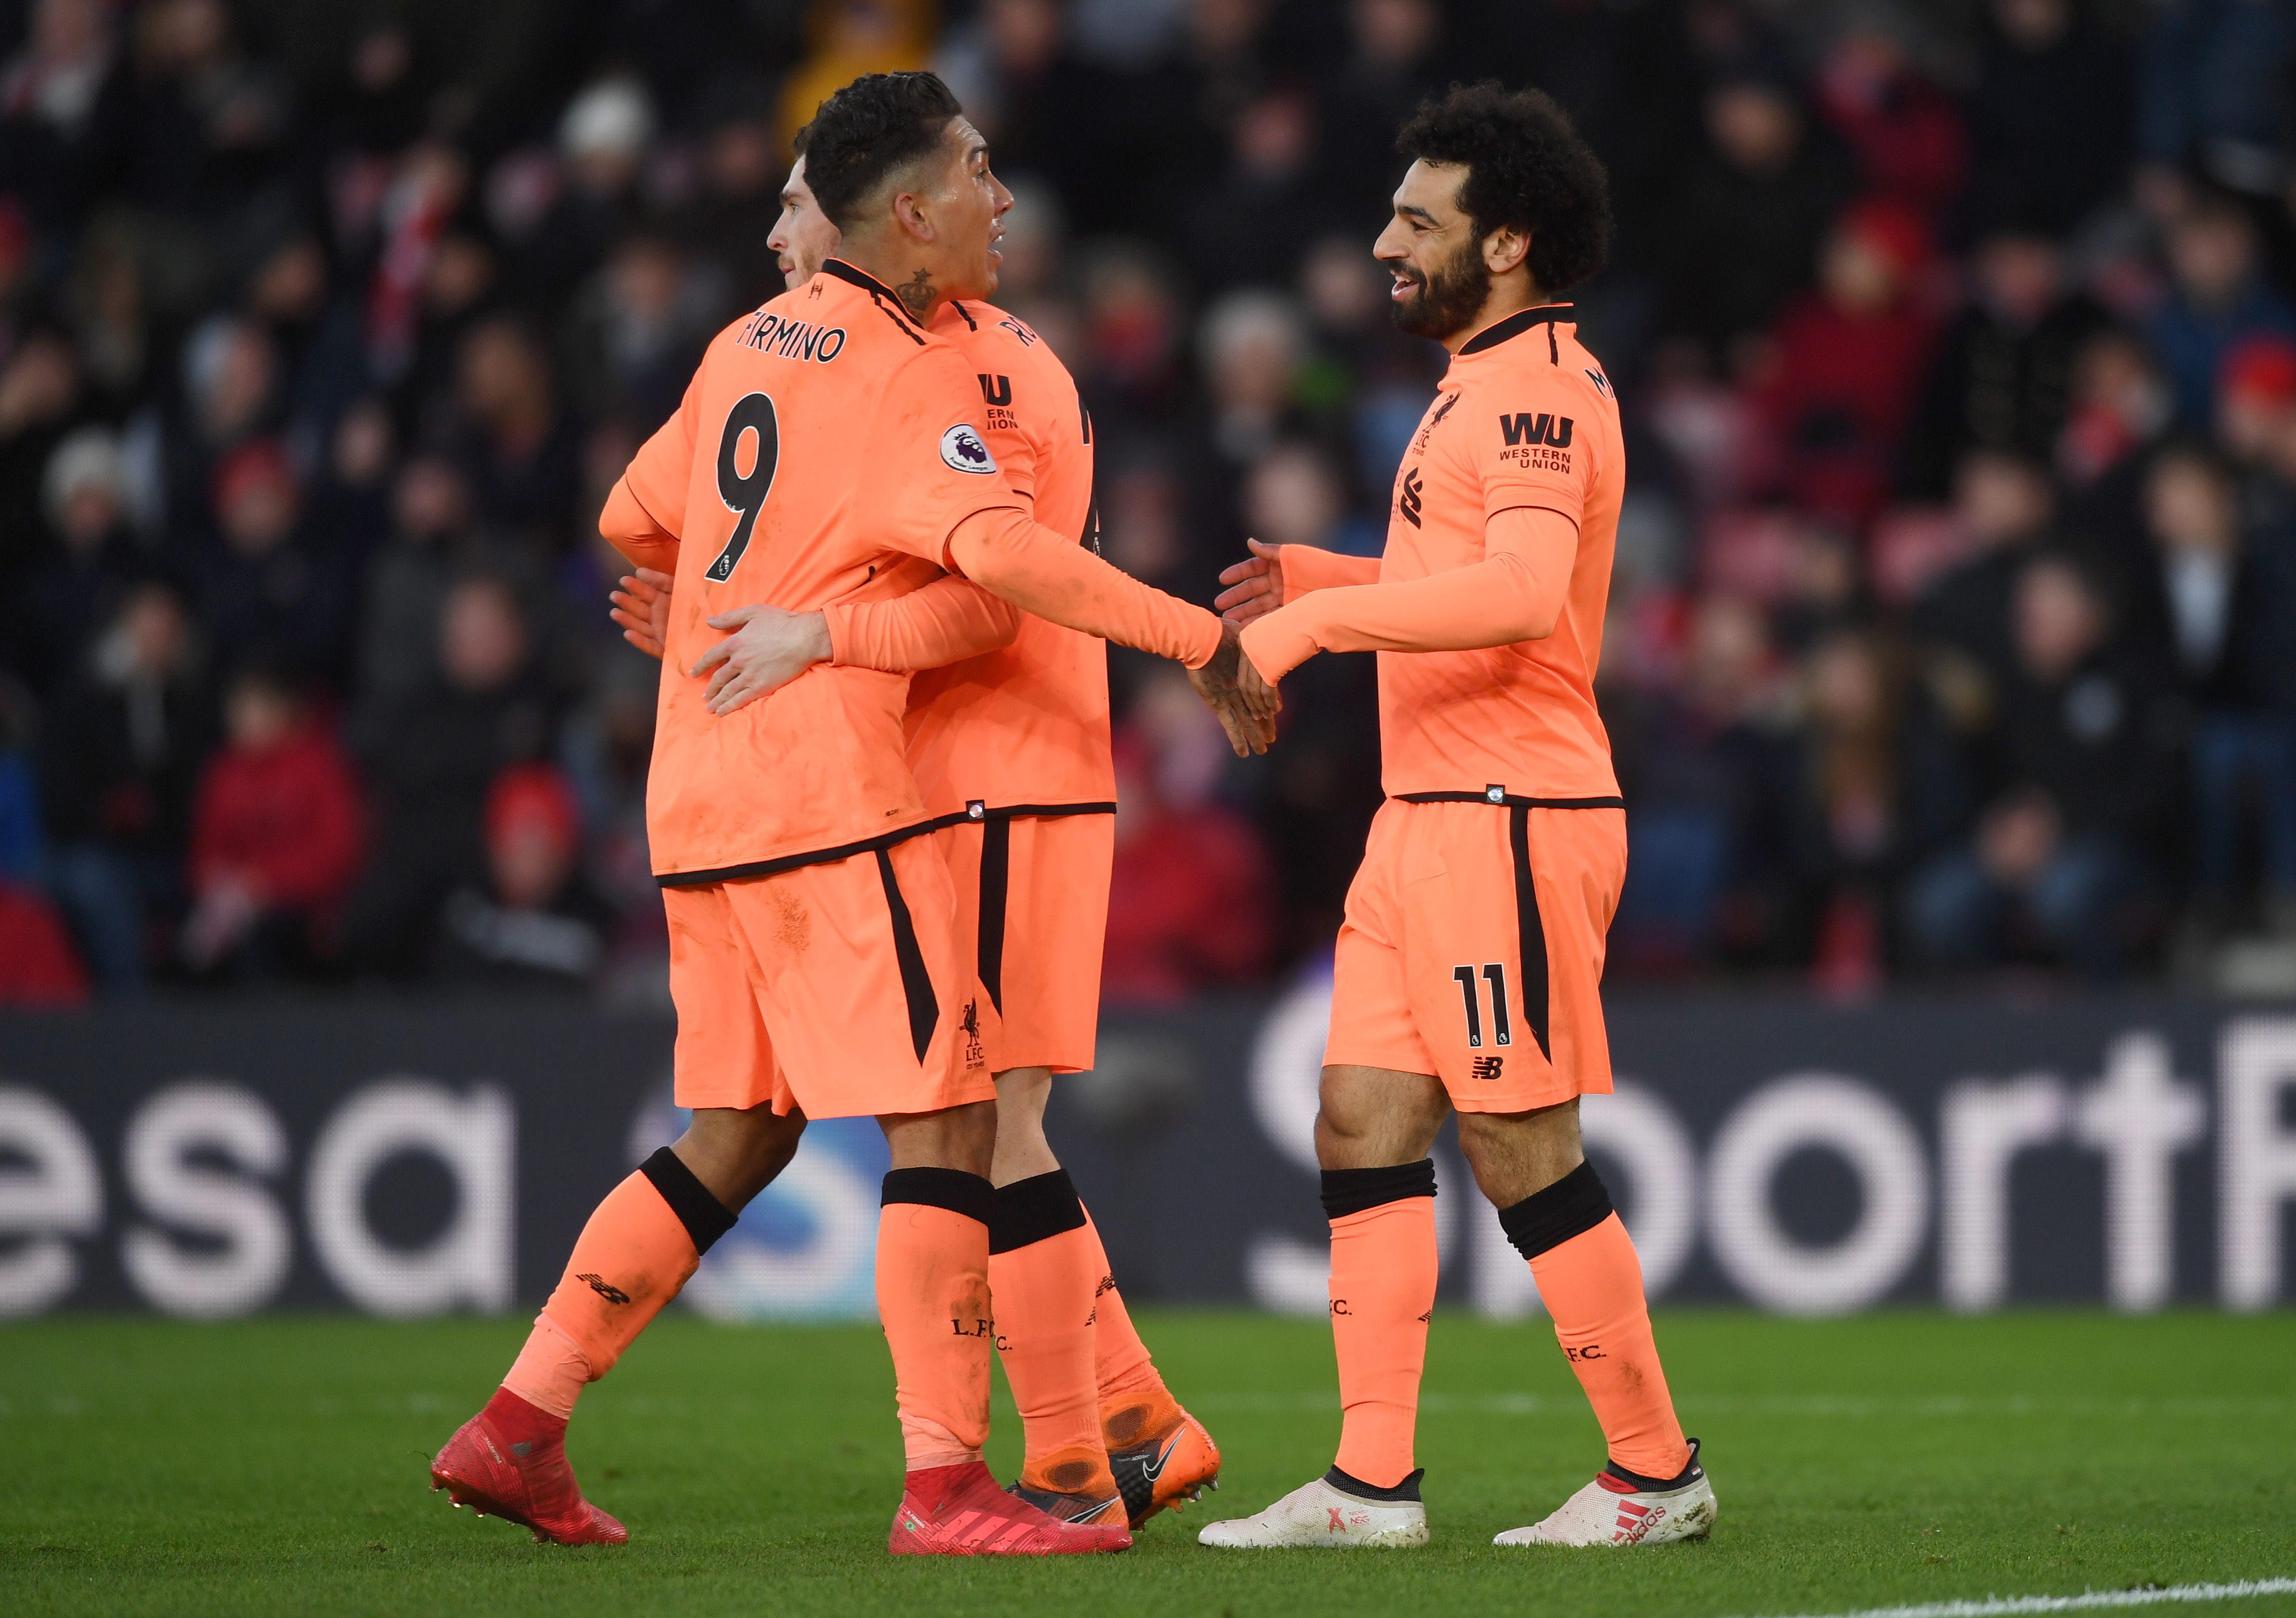 SOUTHAMPTON, ENGLAND - FEBRUARY 11:  Mohamed Salah of Liverpool celebrates after scoring his sides second goal with Roberto Firmino of Liverpool and Andy Robertson of Liverpool during the Premier League match between Southampton and Liverpool at St Mary's Stadium on February 11, 2018 in Southampton, England.  (Photo by Michael Regan/Getty Images)